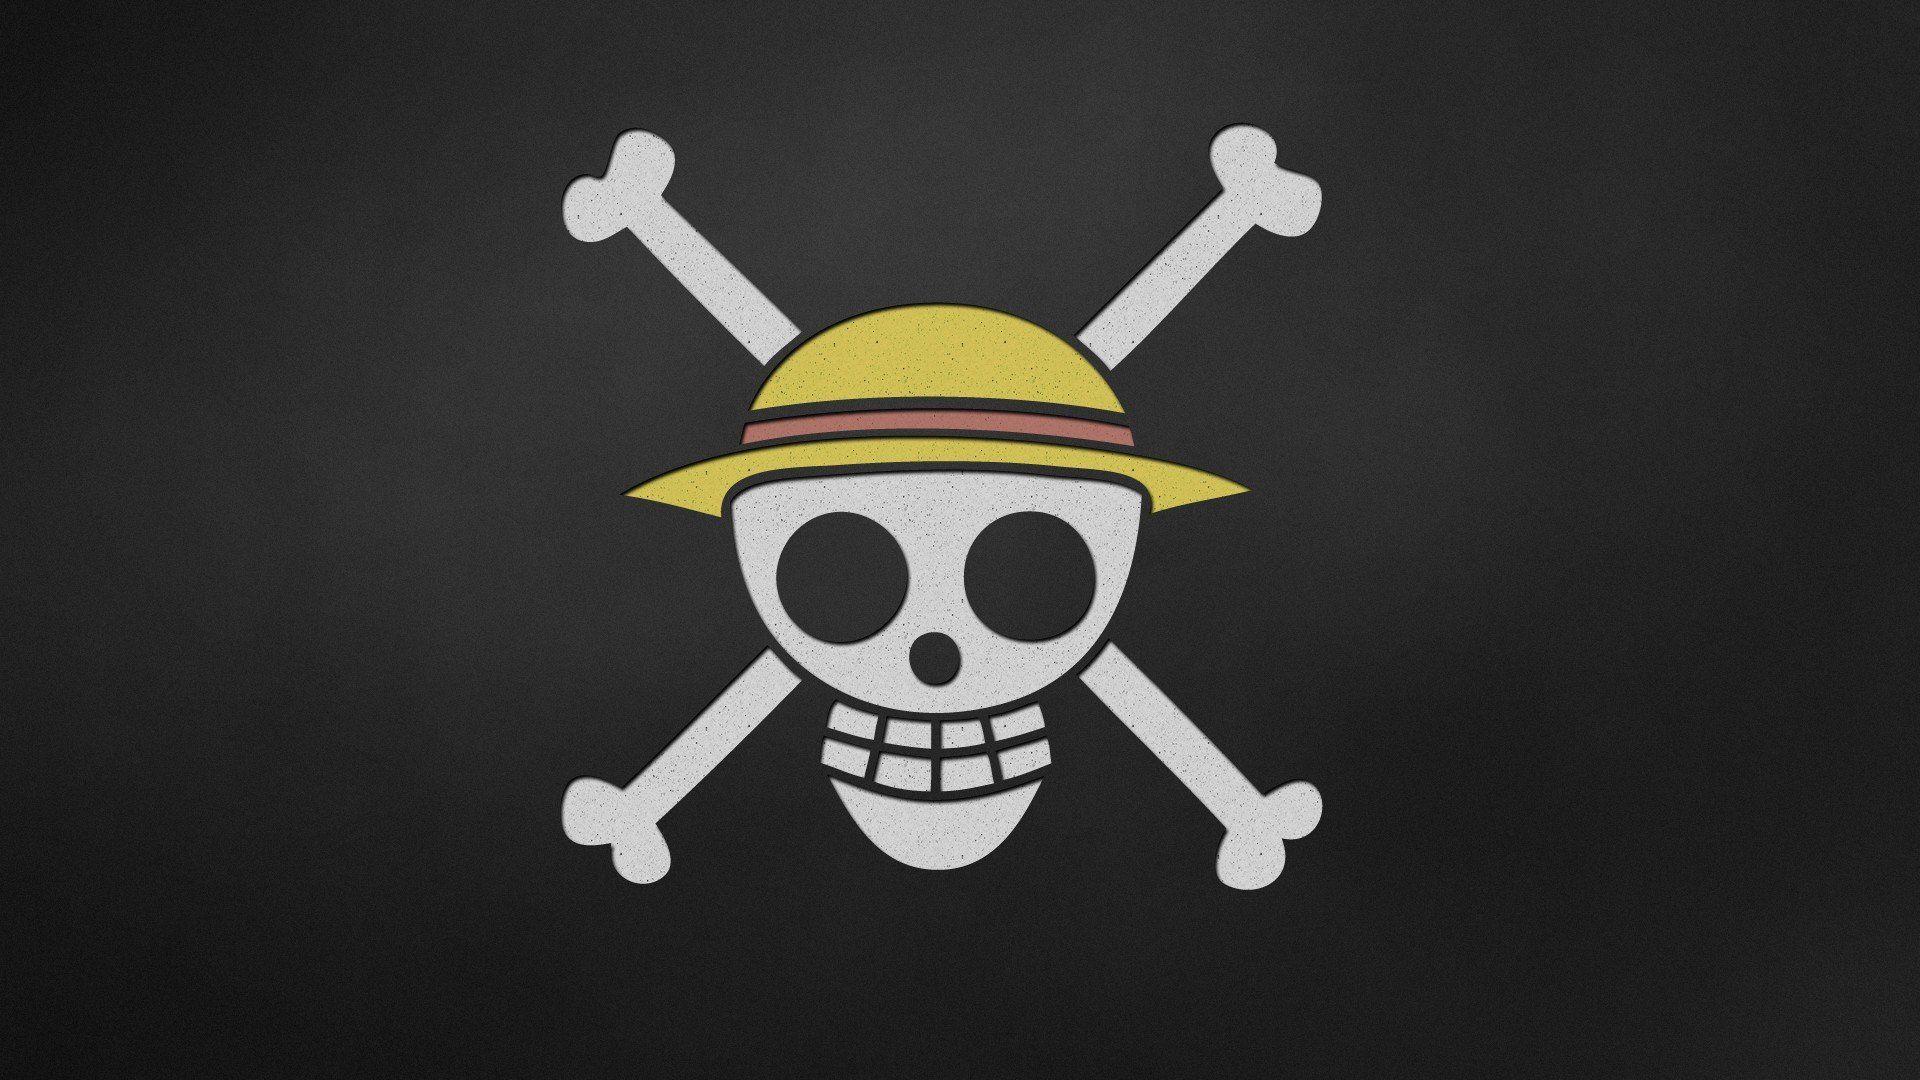 One Piece Pirate Flag Template